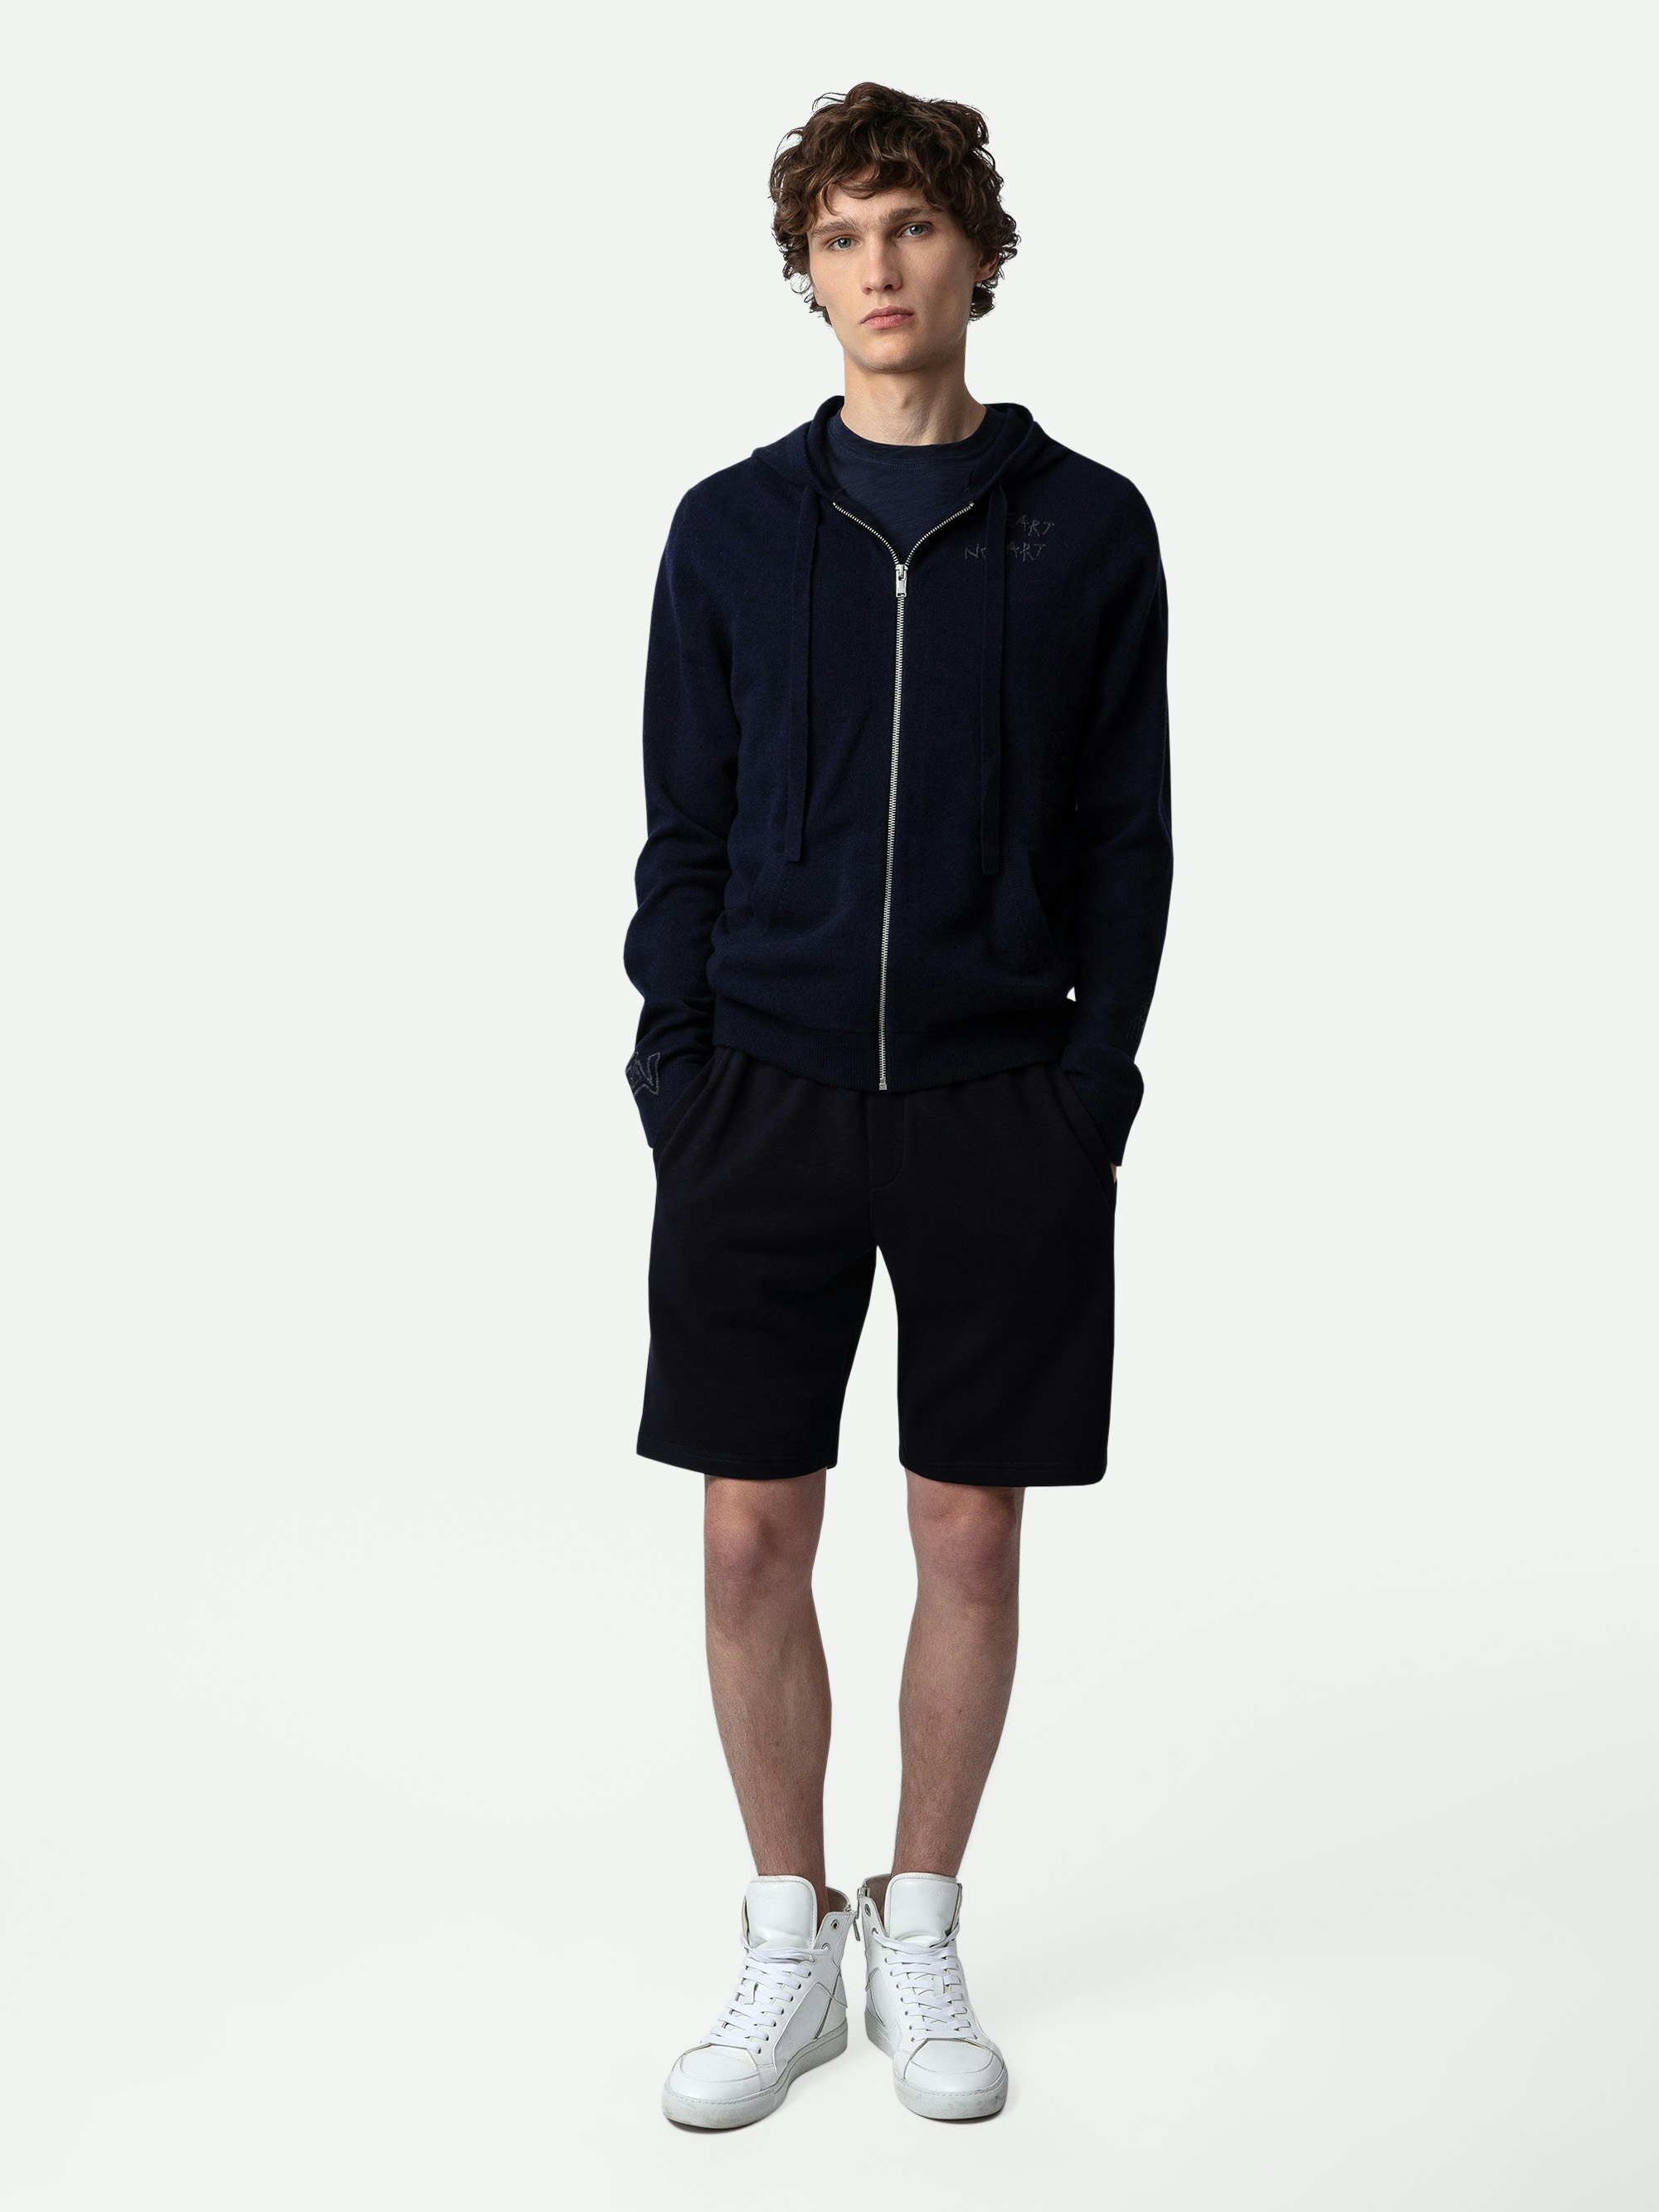 Party Shorts - Navy blue cotton fleece shorts with pockets and Studio patch on the back.